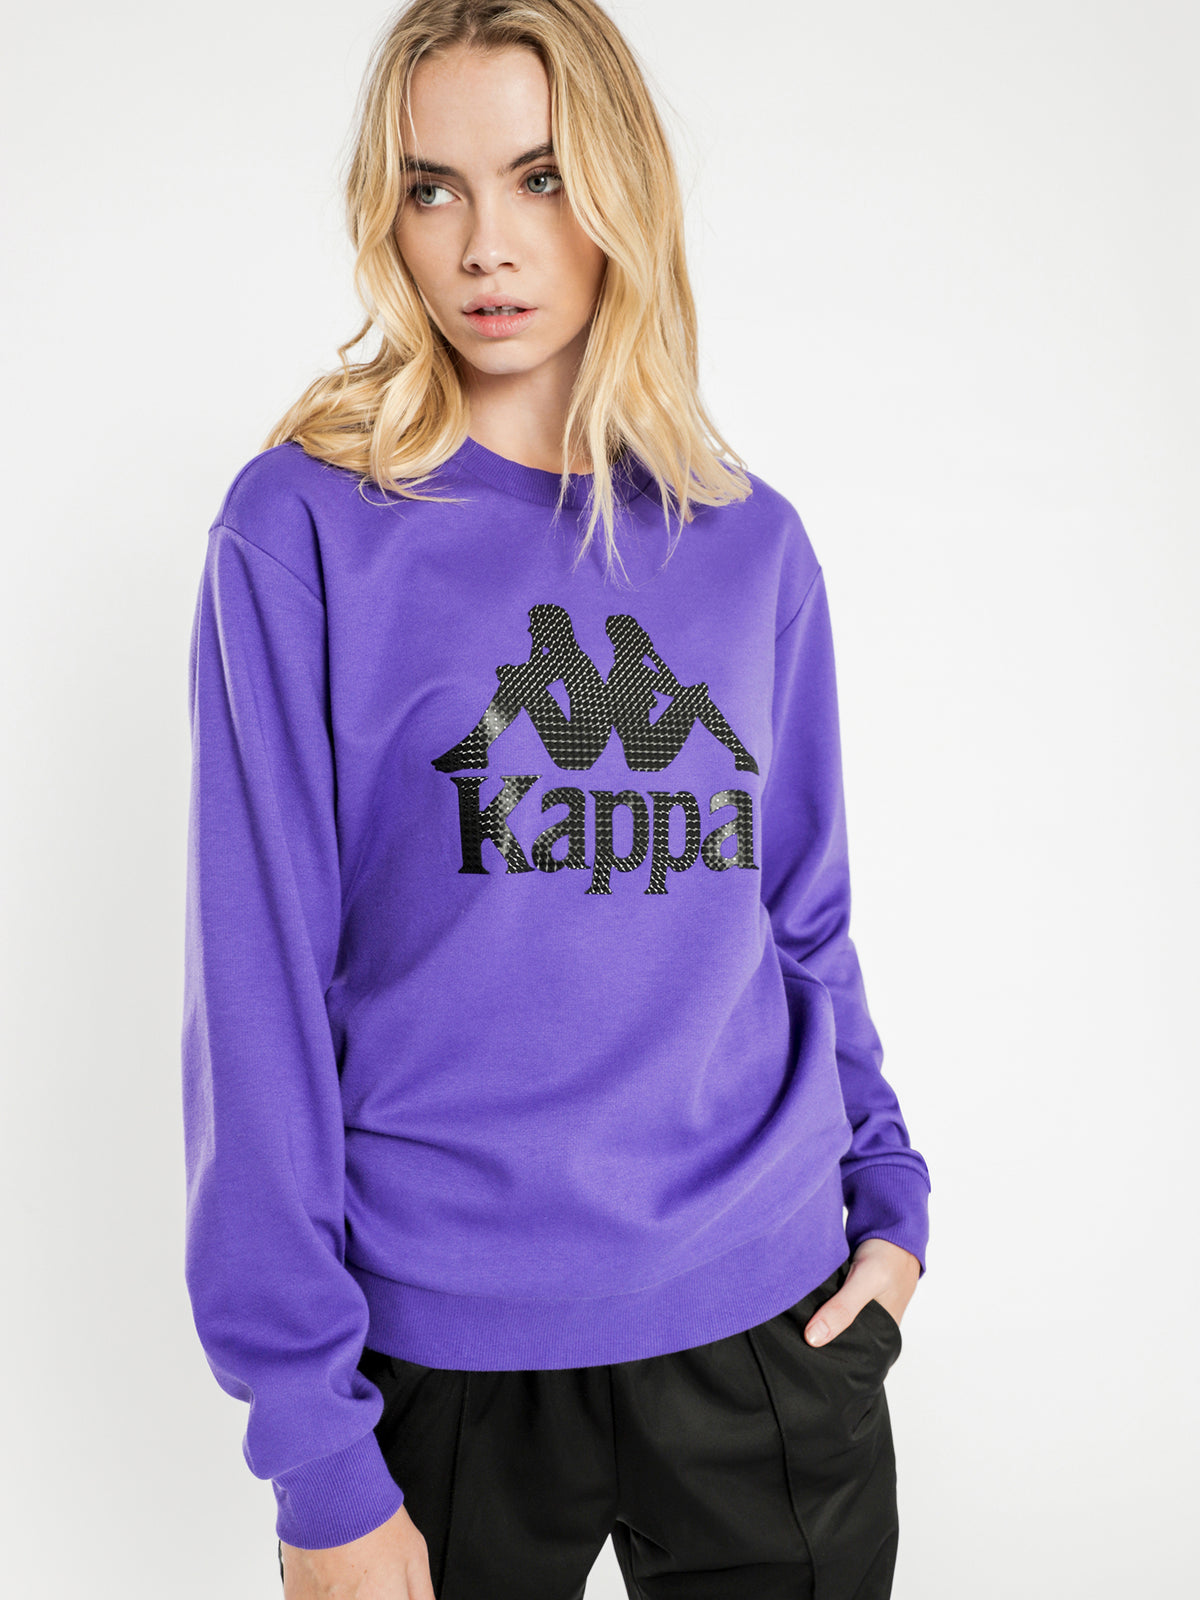 Authentic 222 Banda Sweater in Violet